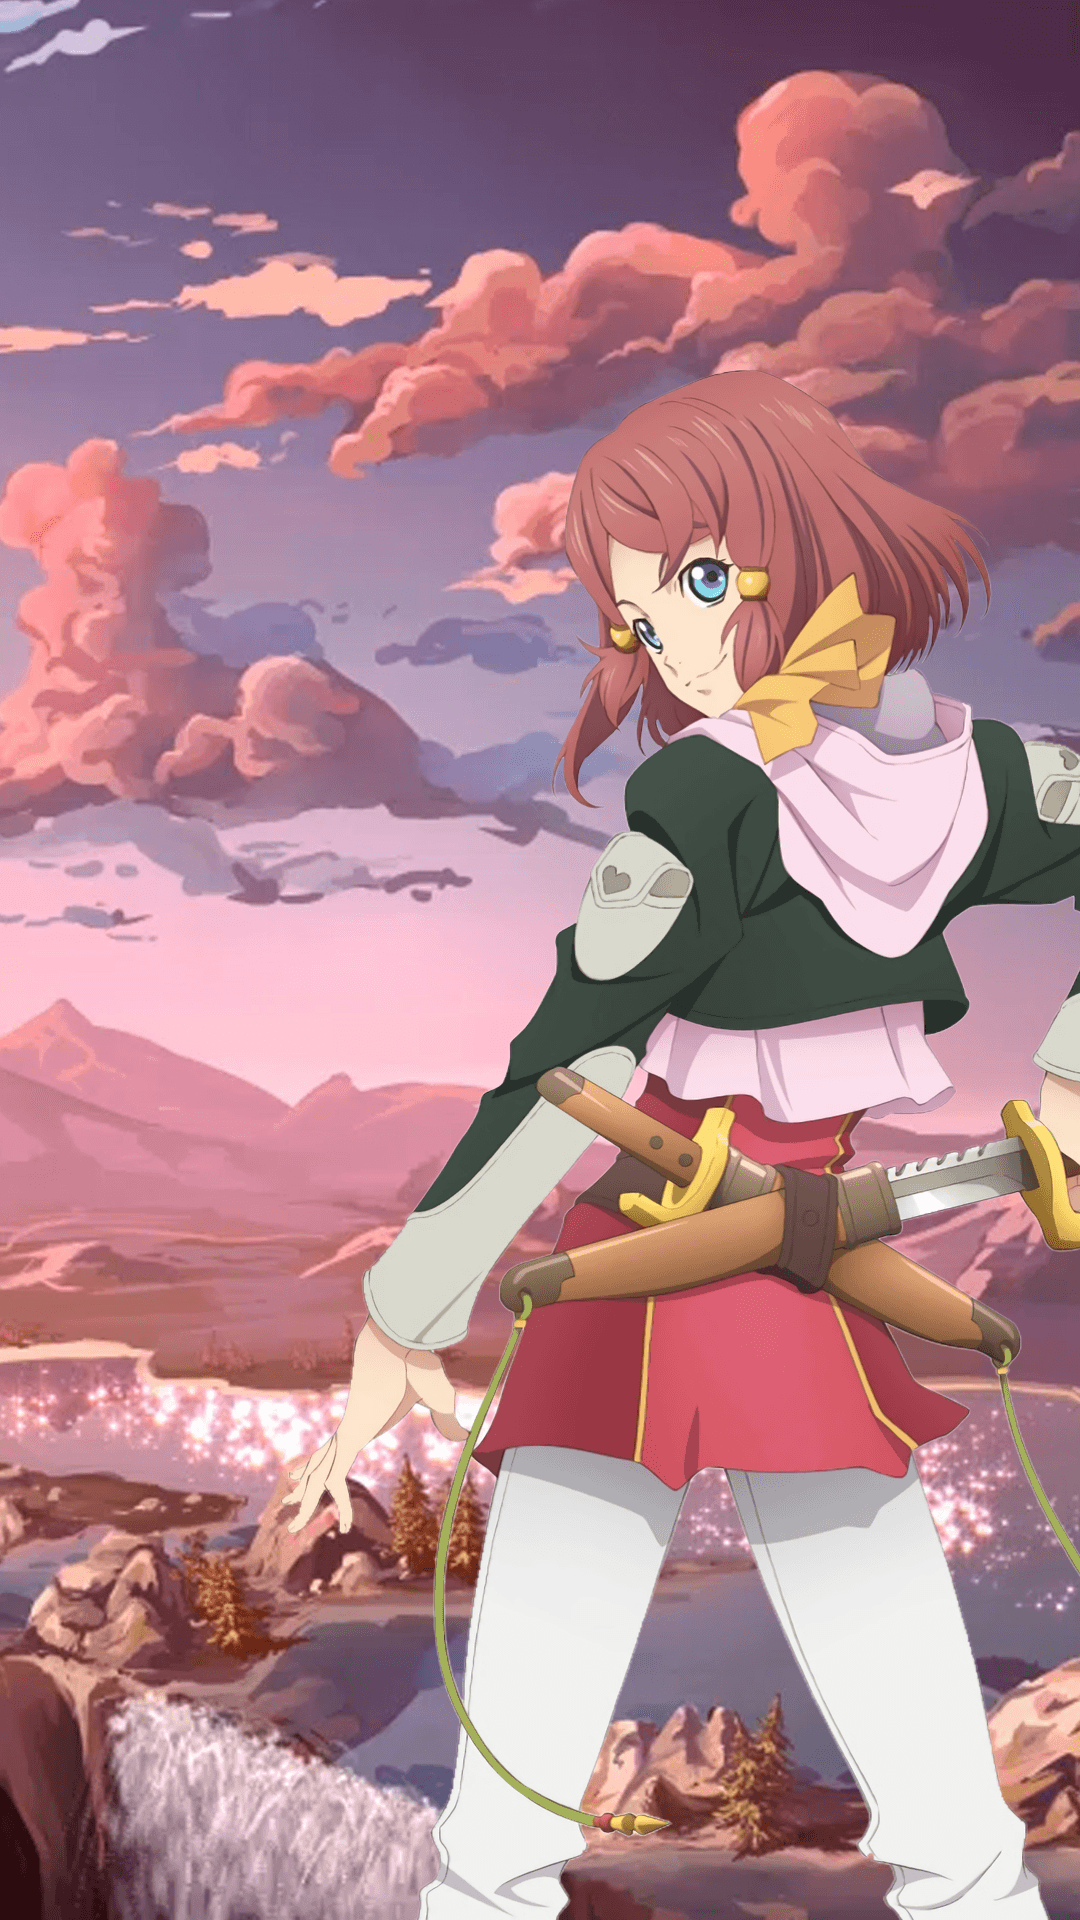 Phone Wallpaper Of Rose From Tales Of Zestiria [1080x1920] • R Animewallpaper. Tales Of Zestiria, Tales Of Zestiria Rose, Tales Of Vesperia